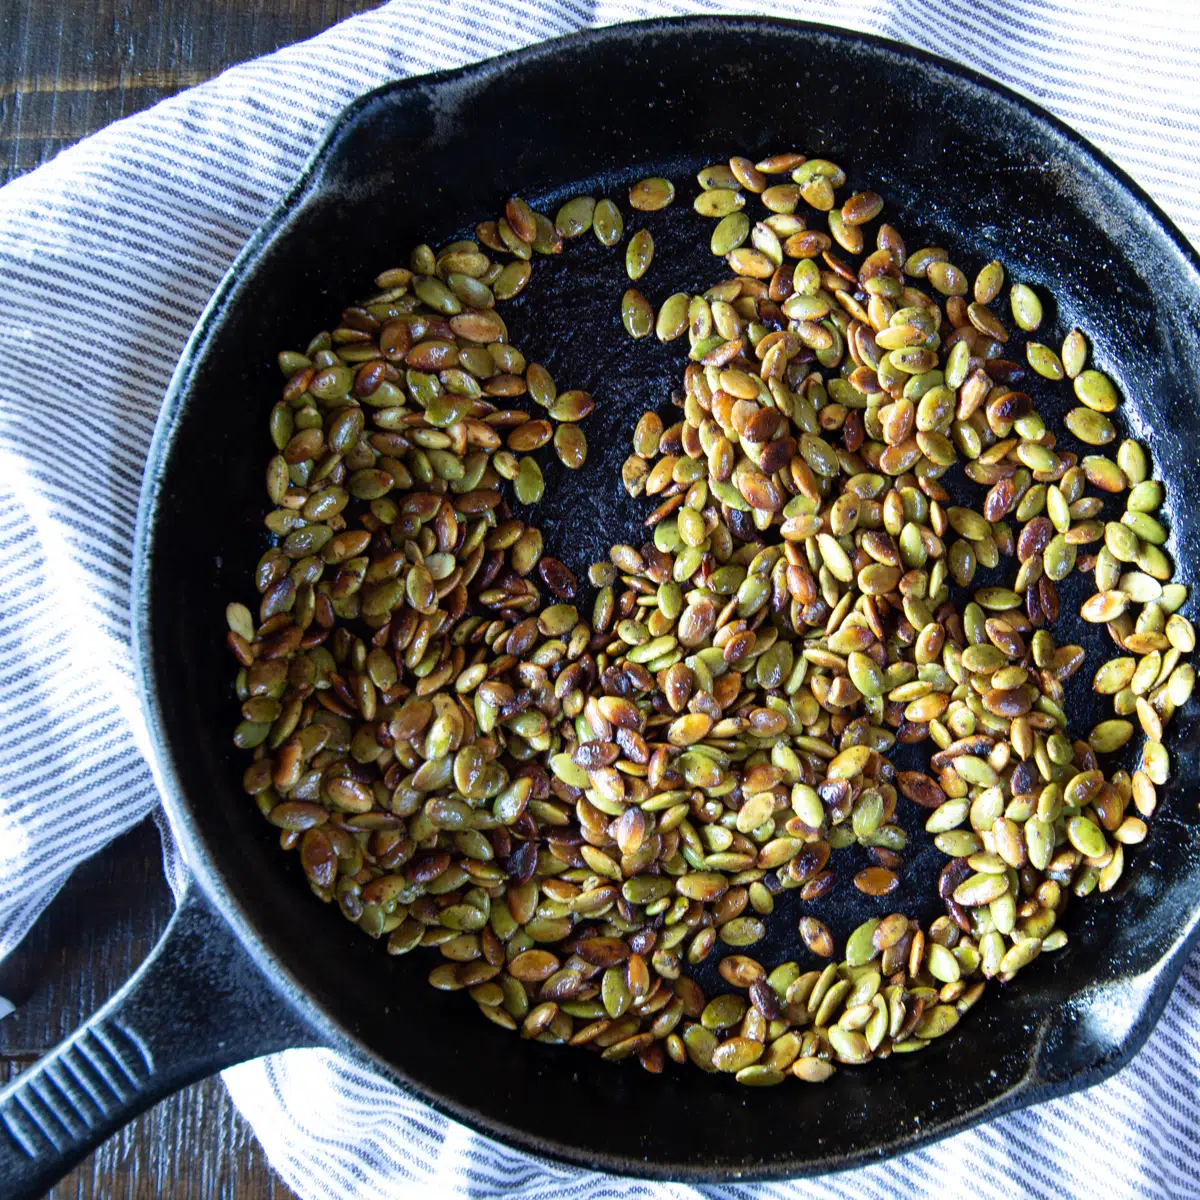 Roasted pumpkin seeds in a cast iron skillet.